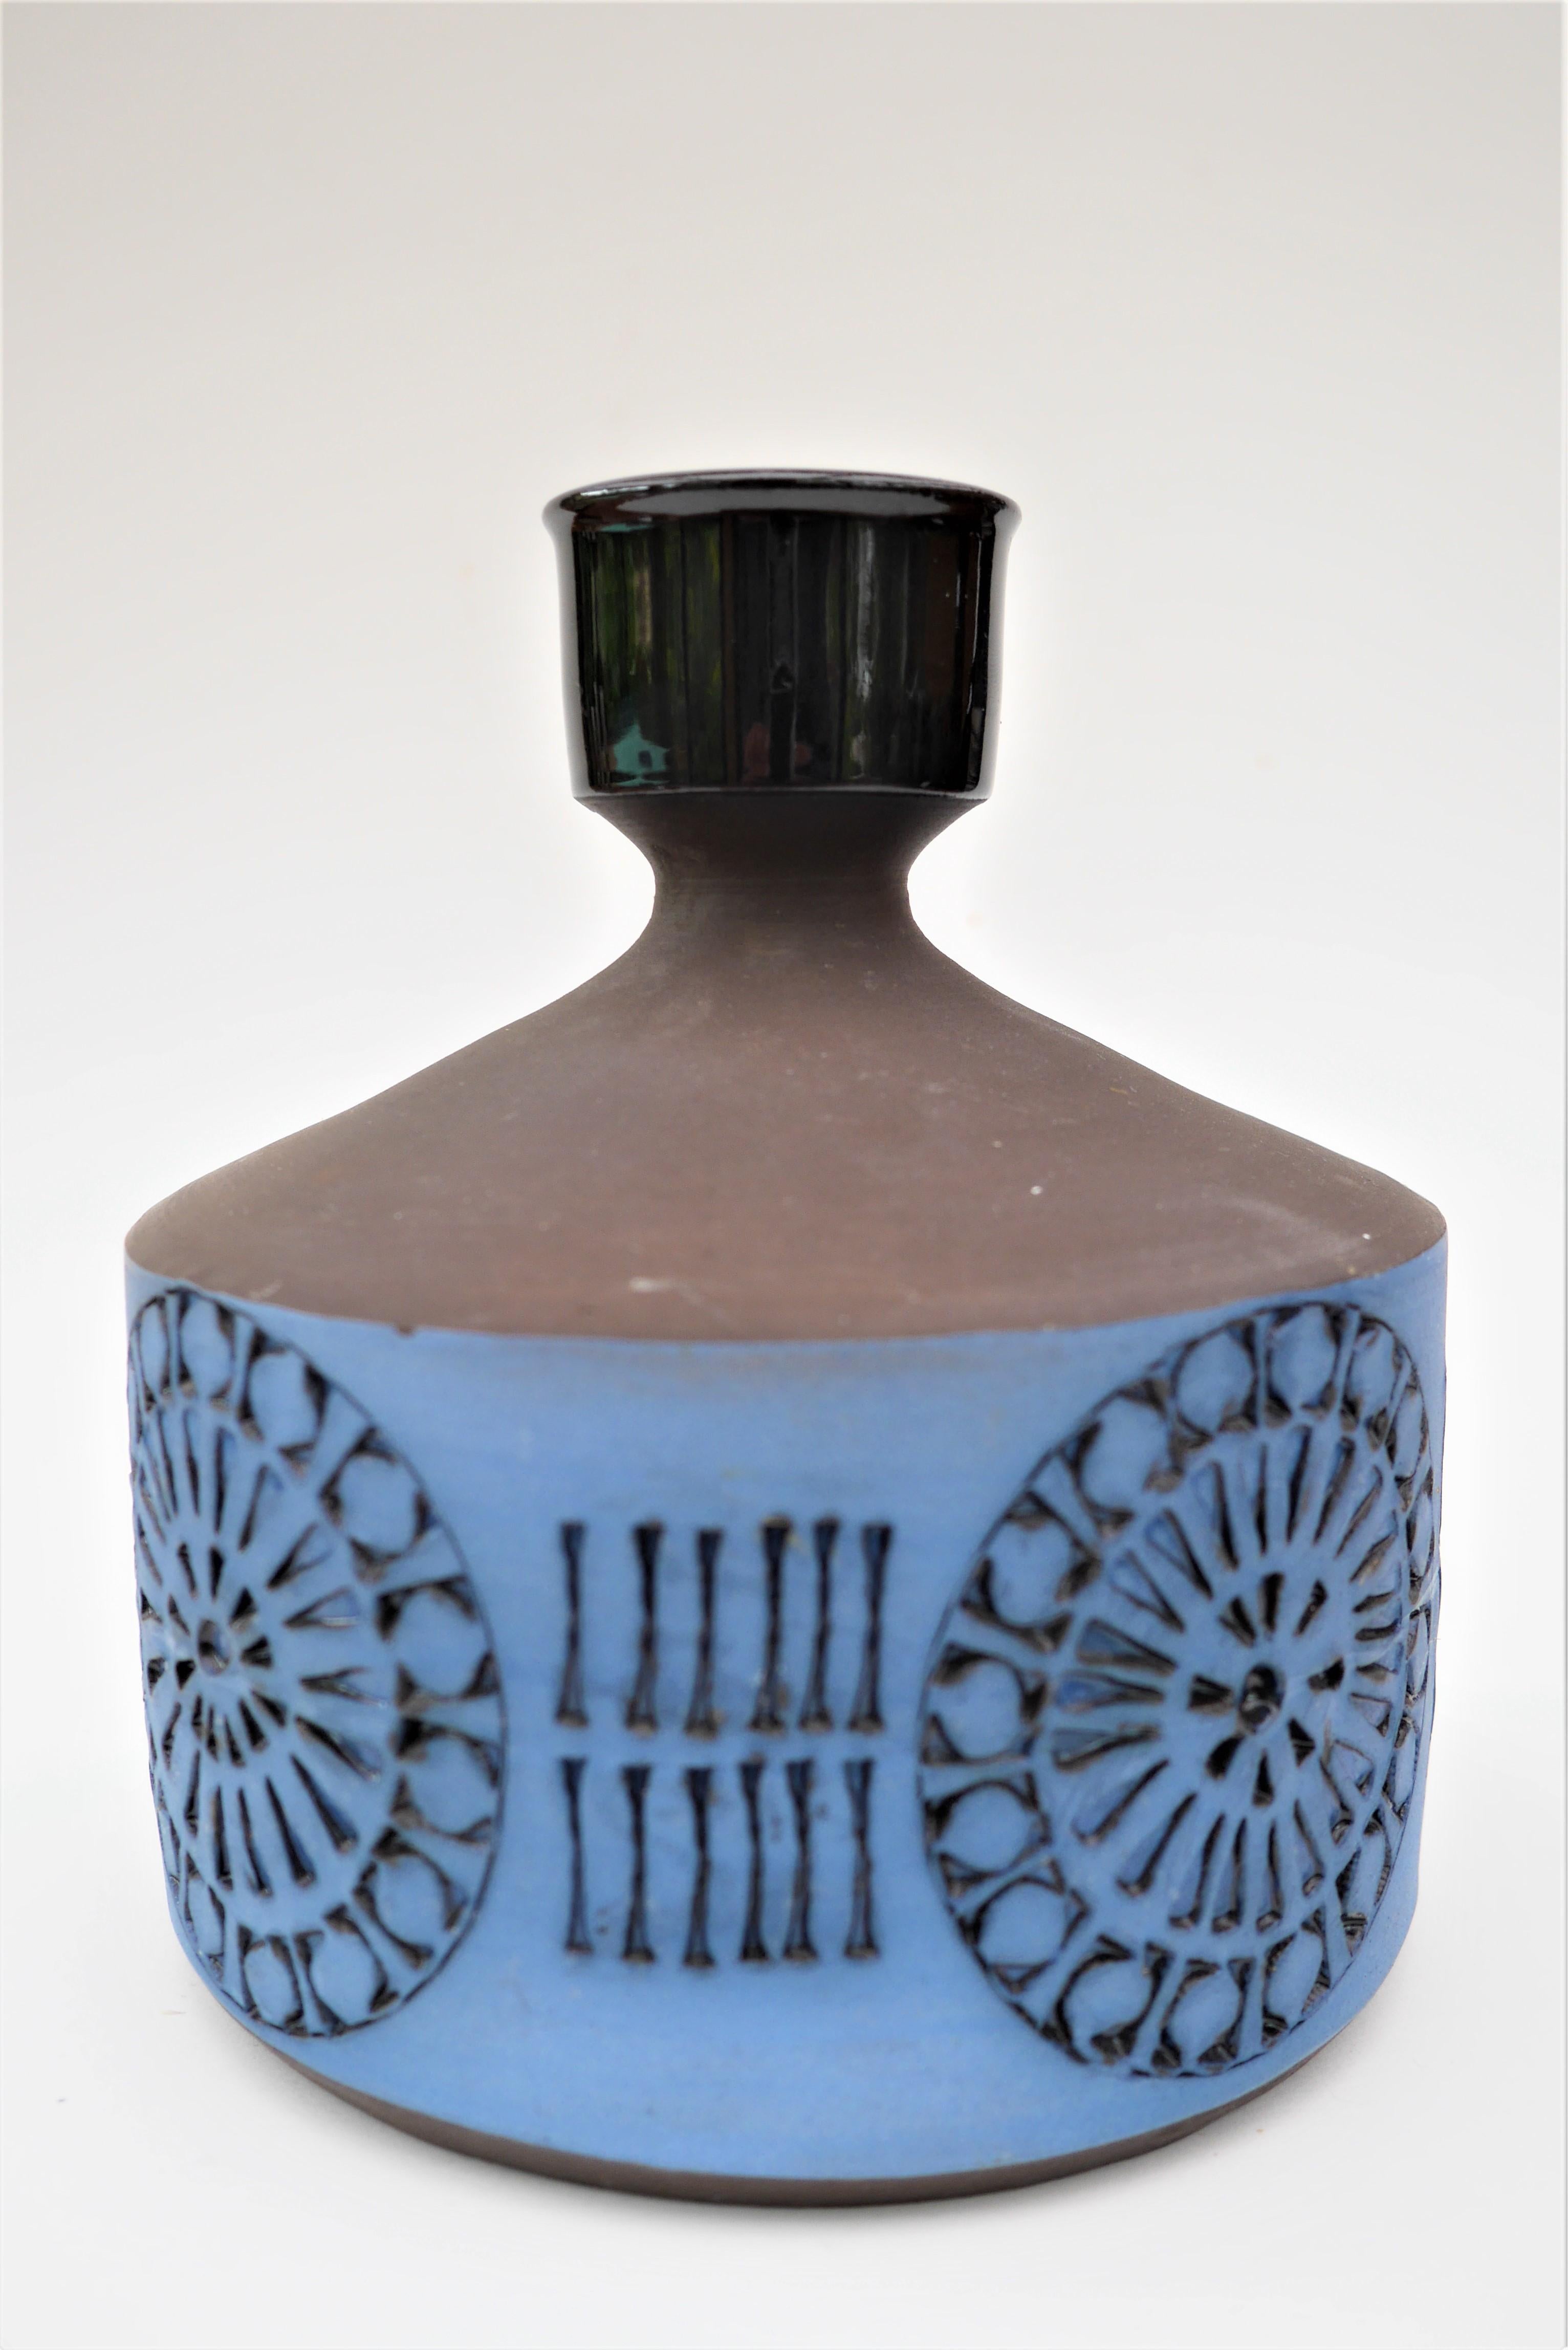 Glossy black glaze on the top and inside. Matt blue coloured glaze around the patterned lower body. Hand carved graphic pattern around the base of the vase. Stamped and signed under base. Manufactured by Alingsås Keramik in the small Swedish town of